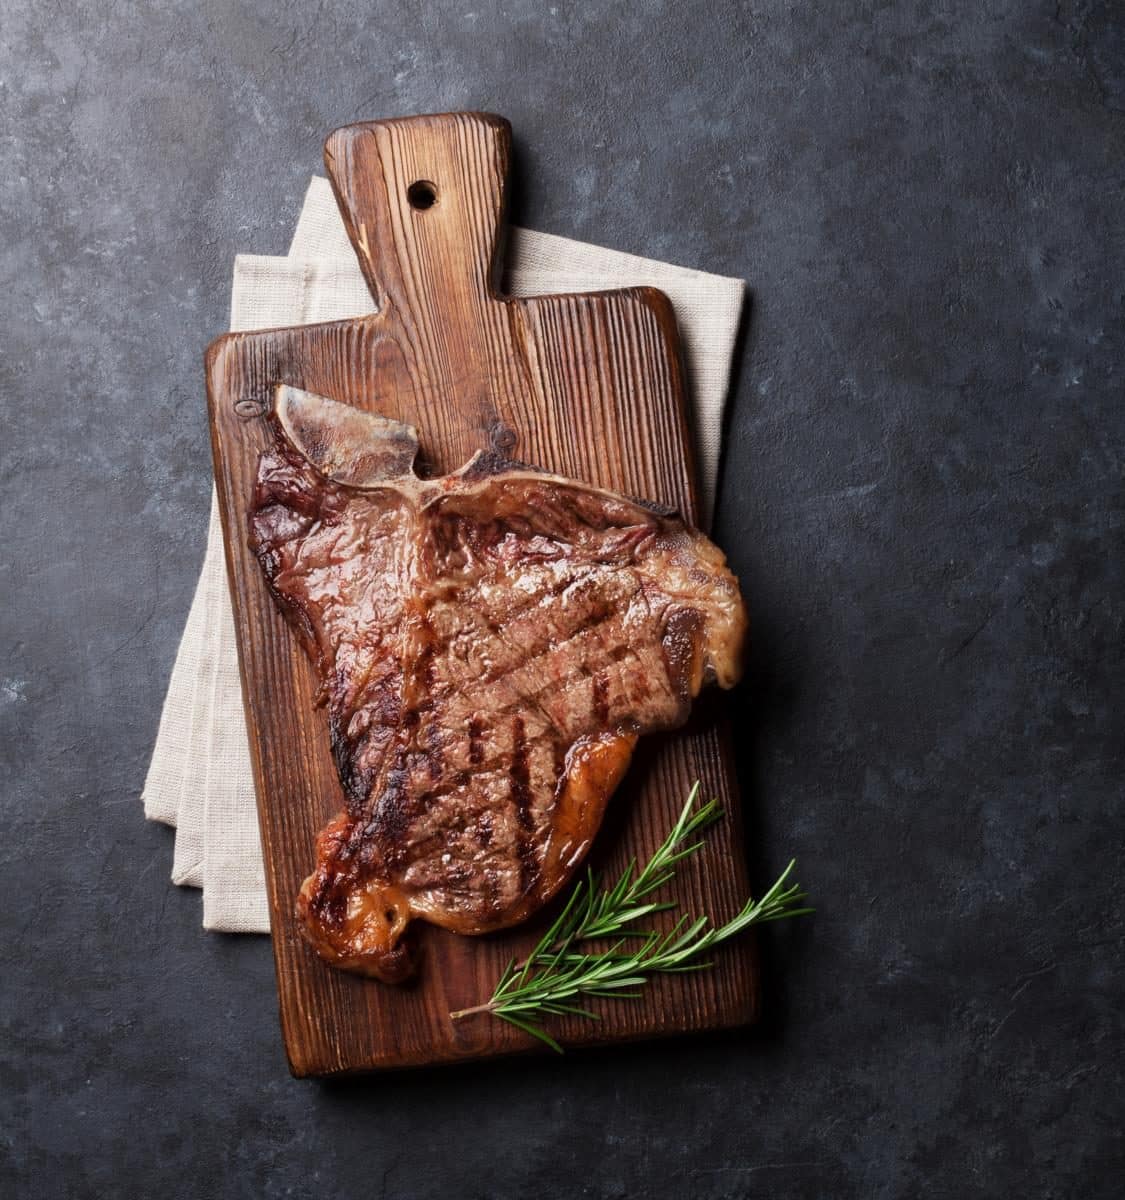 Grilled T-bone steak on stone table. Top view with copy space